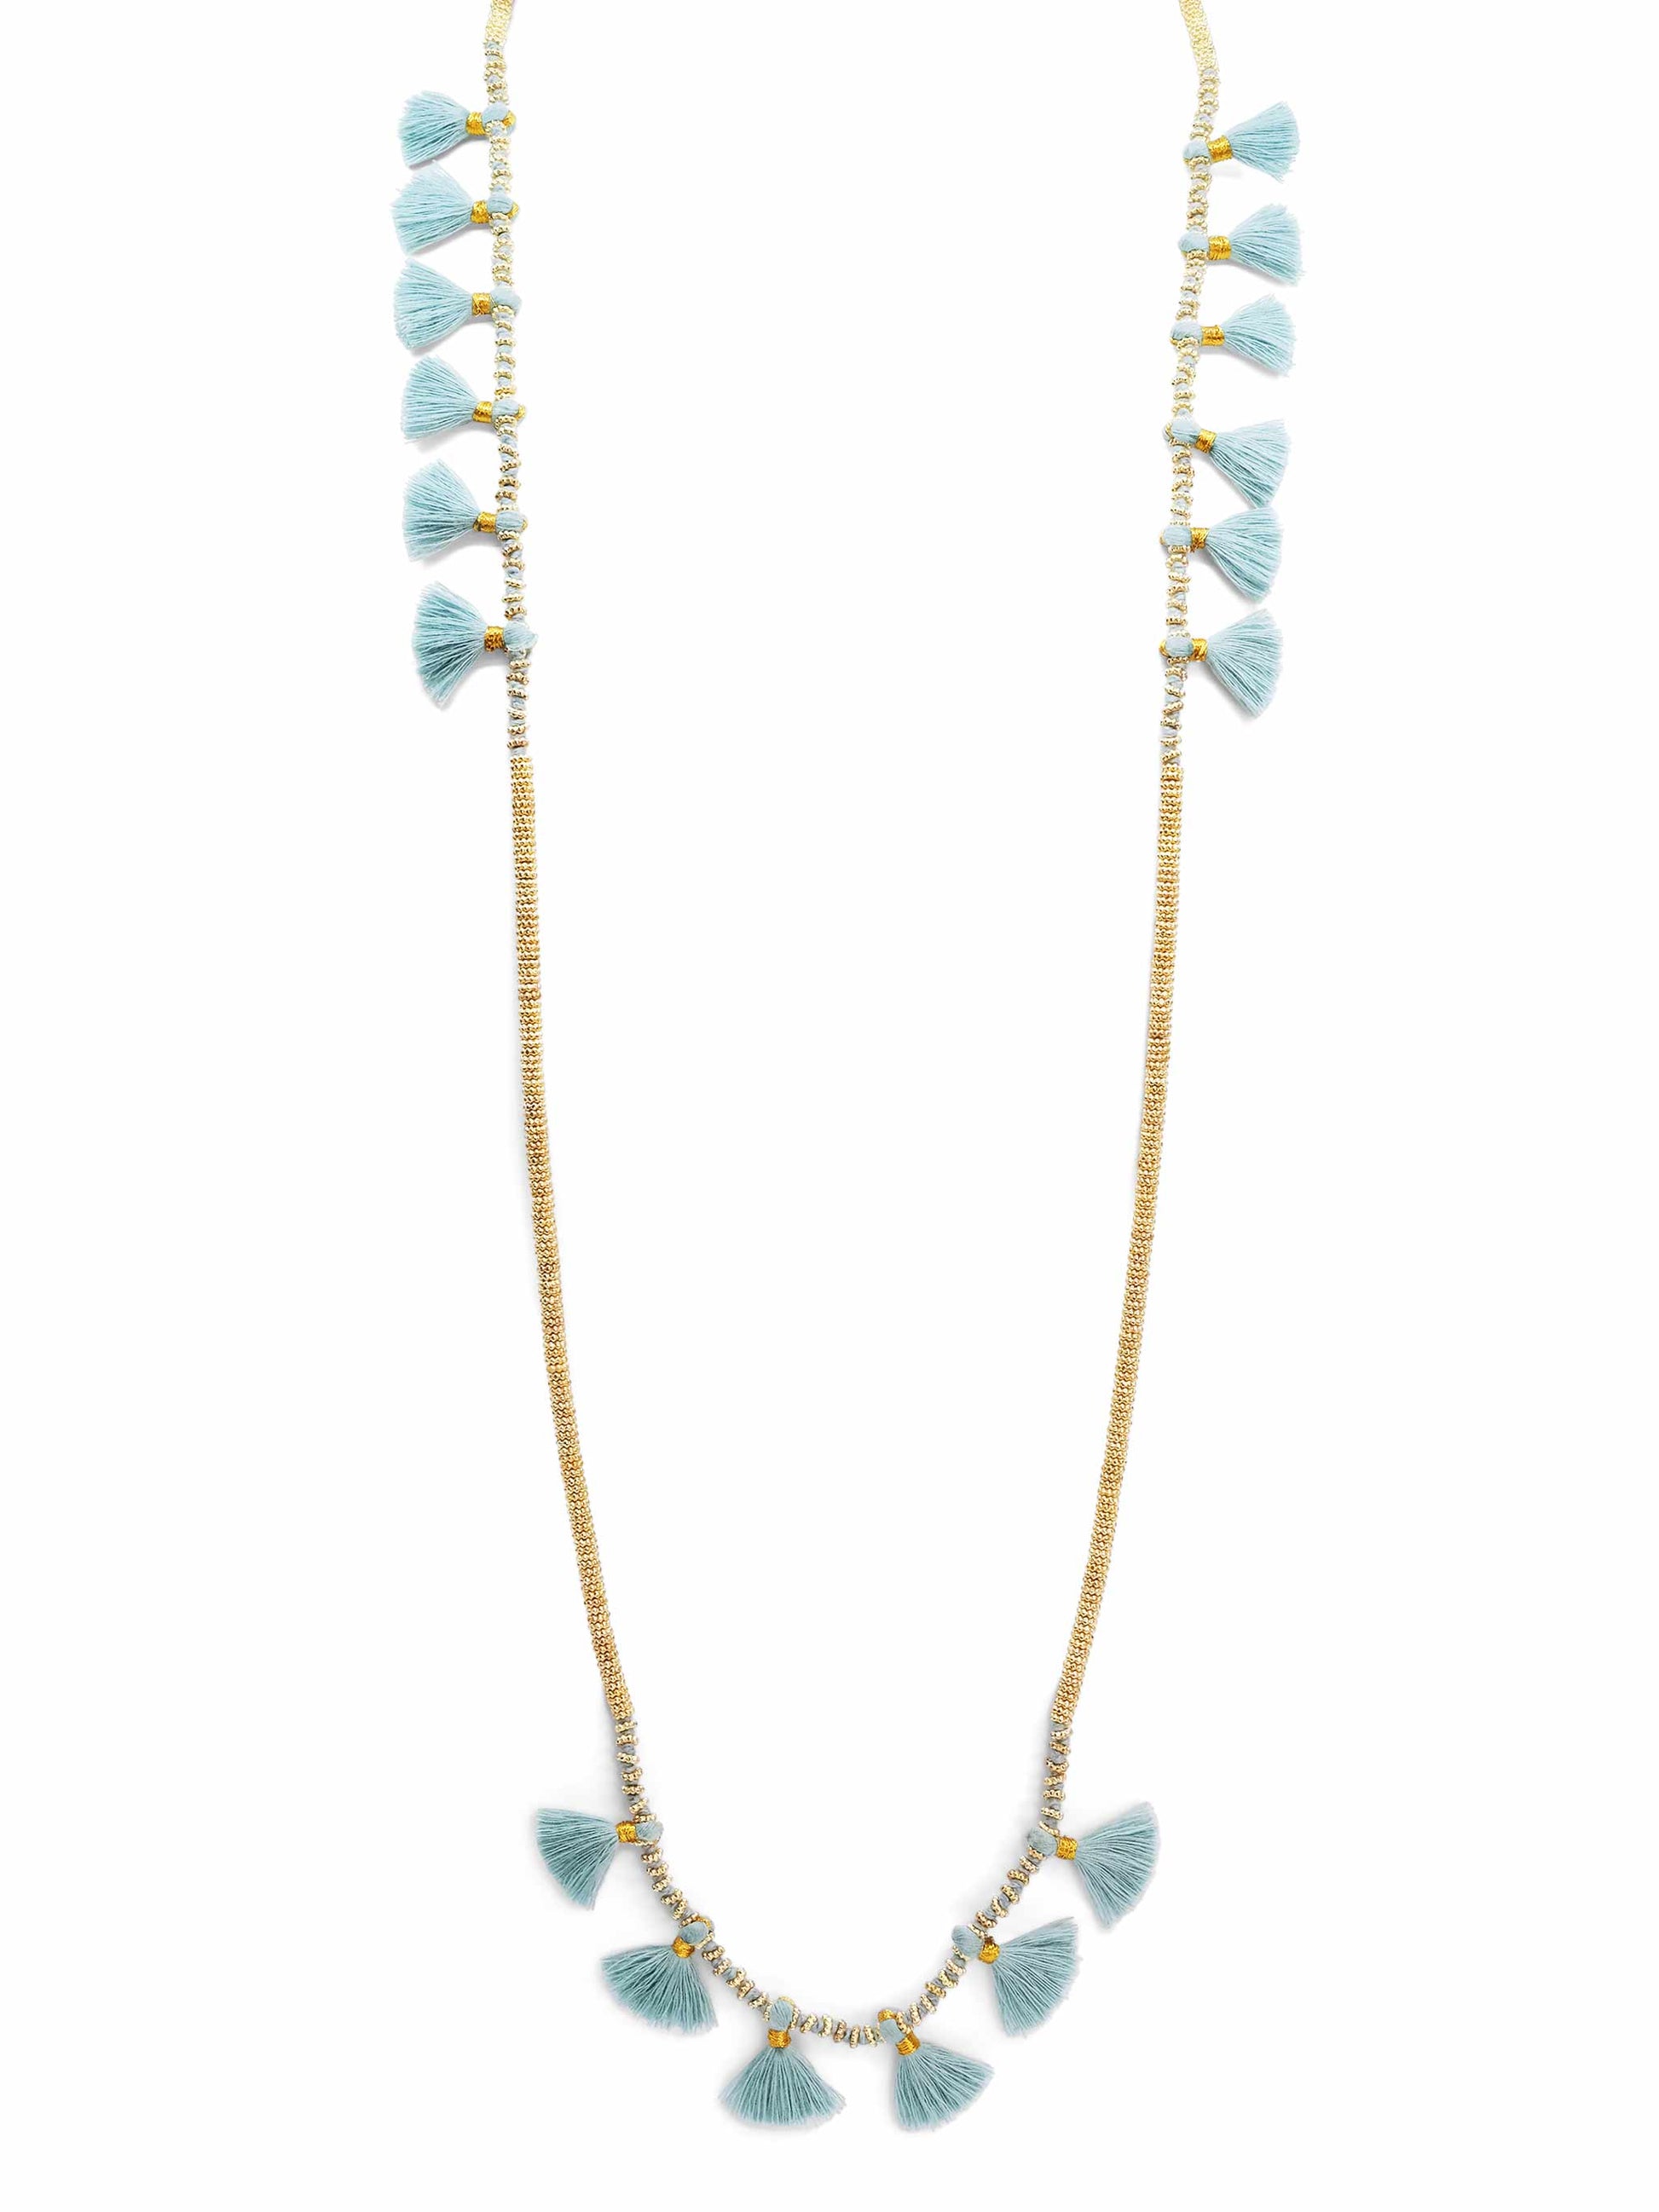 Celina Gold Tone Long Necklace with Teal Blue Tassels